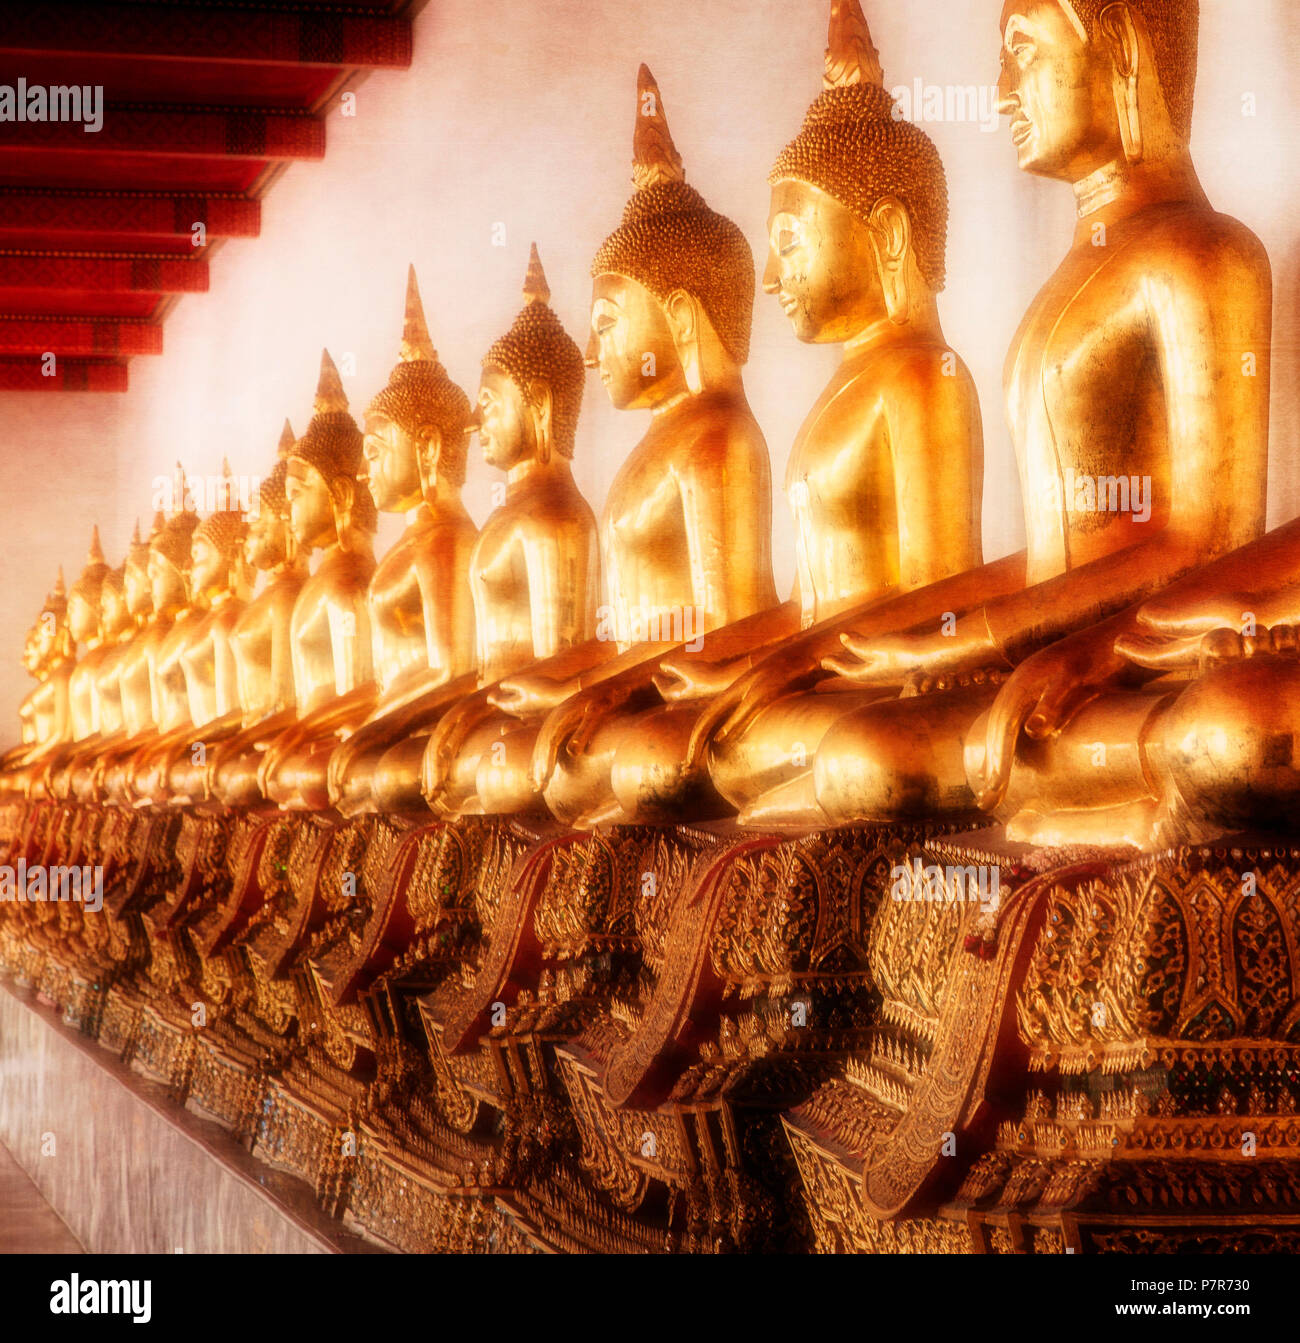 A Buddha collection at Wat Pho, a Buddhist temple in Phra Nakhon district, Bangkok, Thailand. Stock Photo